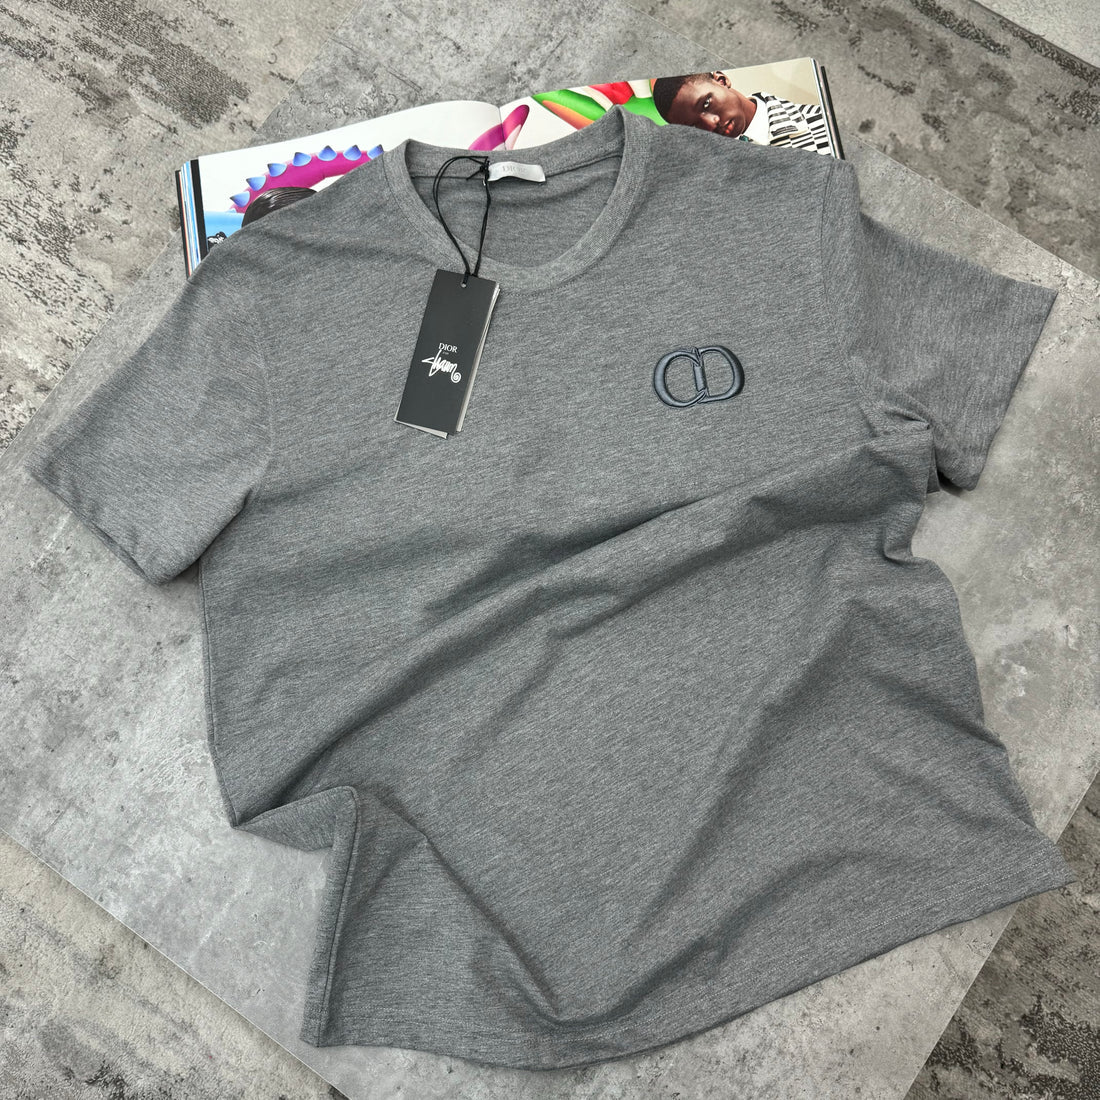 Dior Tshirts (click for latest available Tshirts)